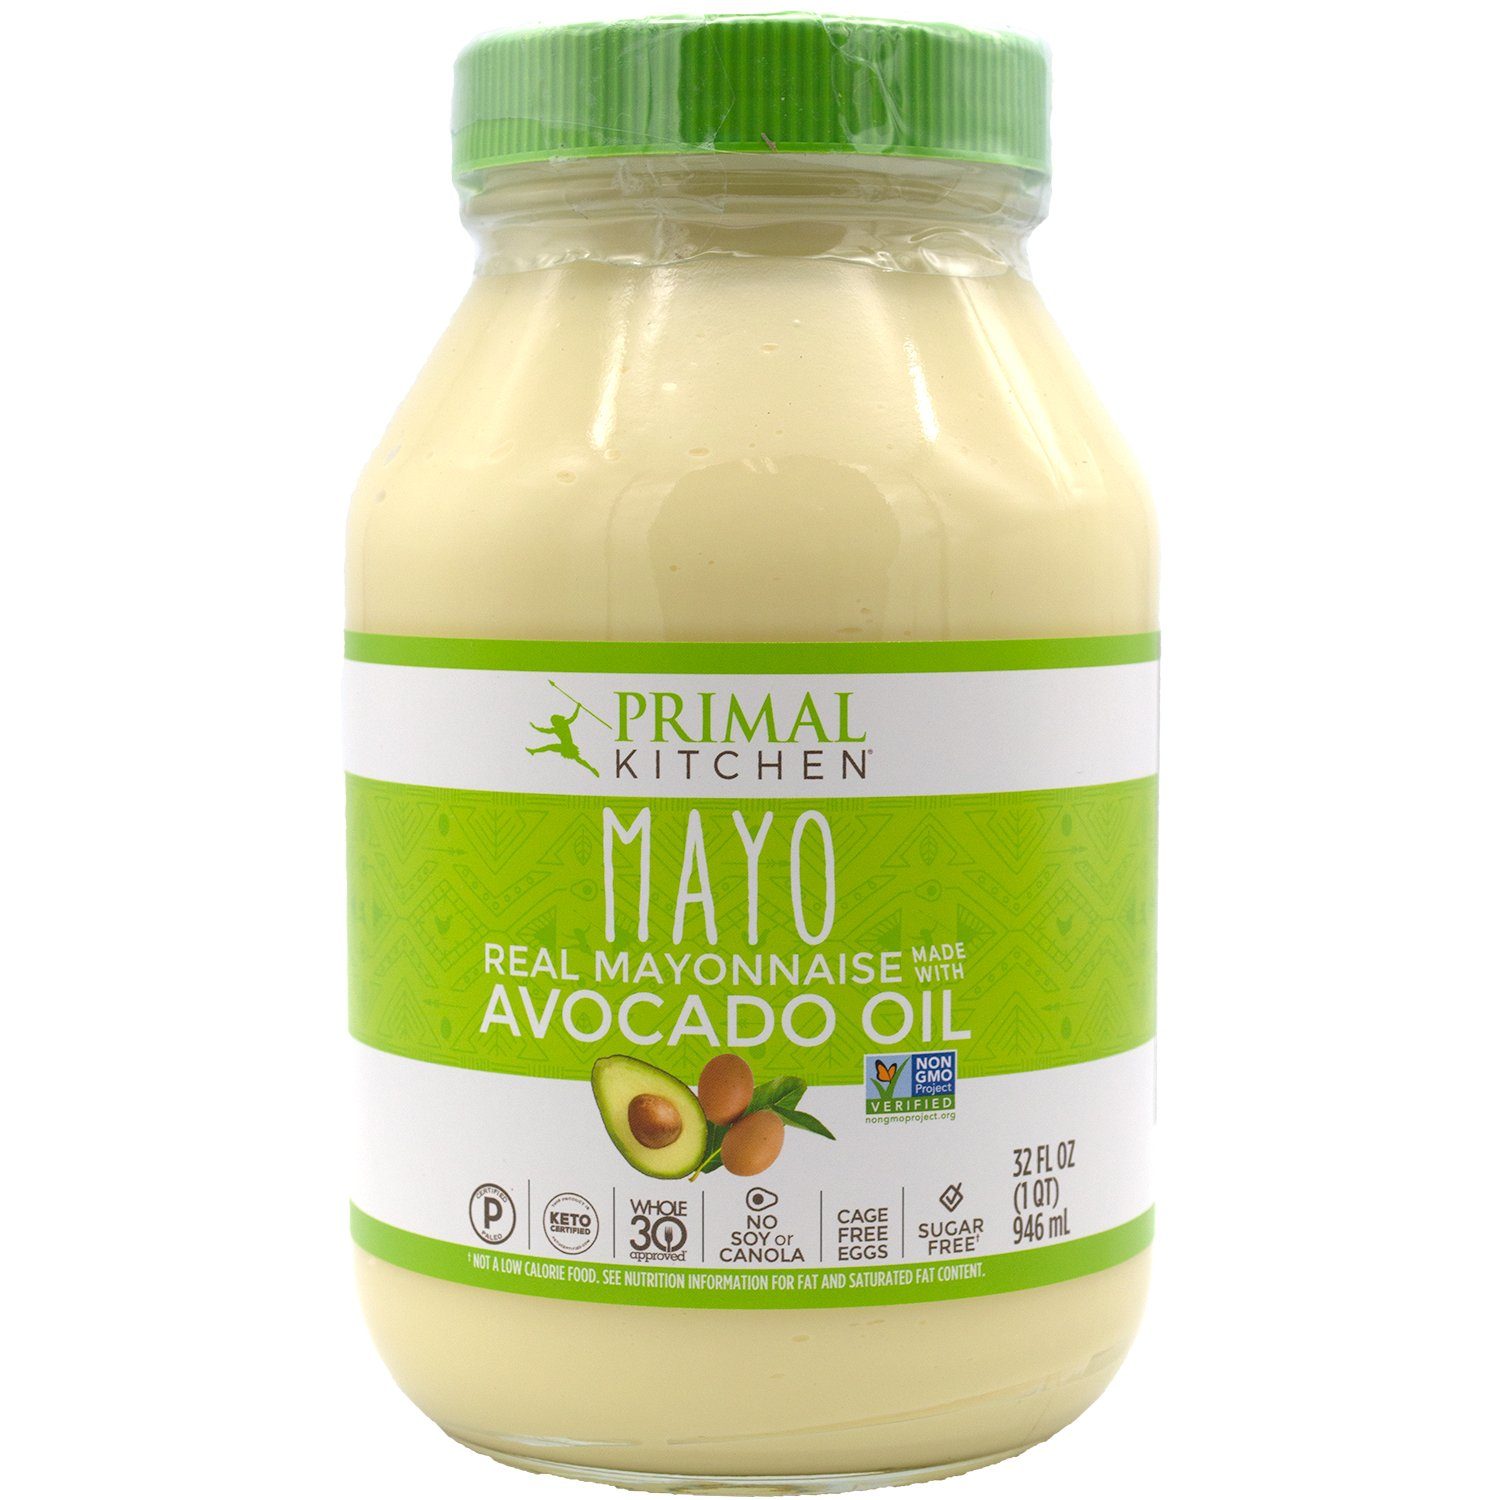 https://cdn.shopify.com/s/files/1/0257/8038/7925/products/primal-kitchen-mayo-with-avocado-oil-primal-kitchen-32-fluid-ounce-537687.jpg